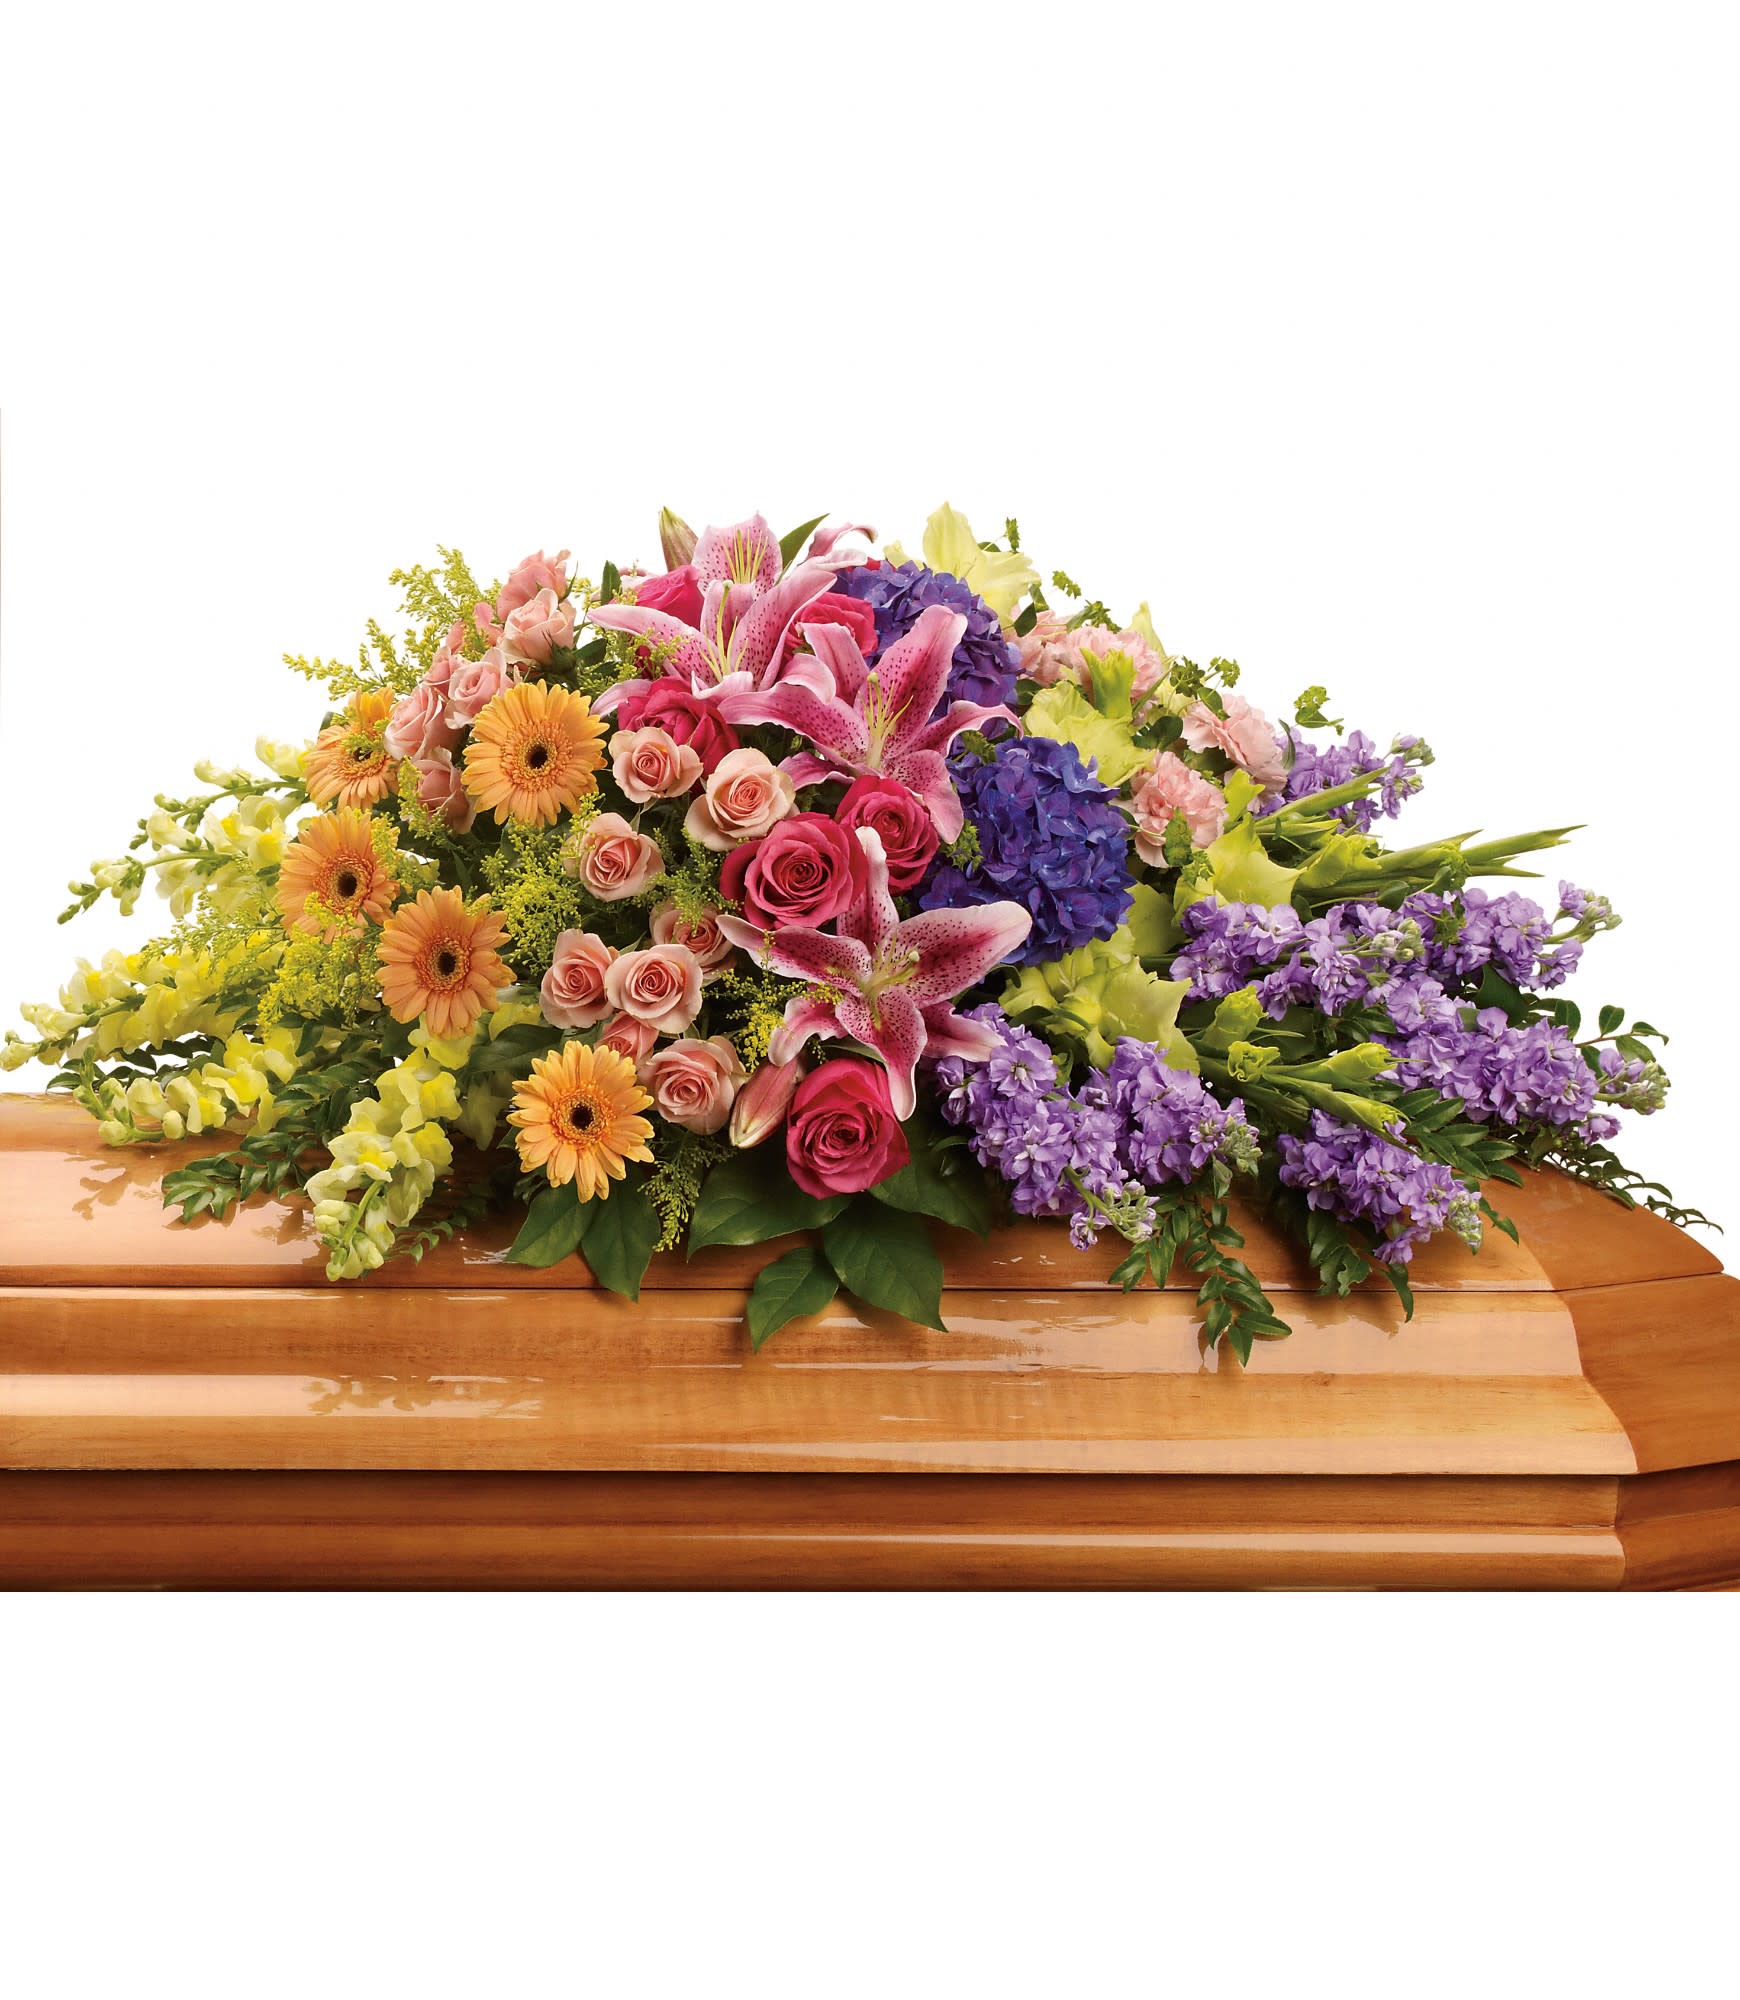 Garden of Sweet Memories Casket Spray by Teleflora - Bring a gentle radiance to the memorial service with this lovely multicolored casket spray of roses, lilies and other favorites. A beautiful way to honor the departed. 